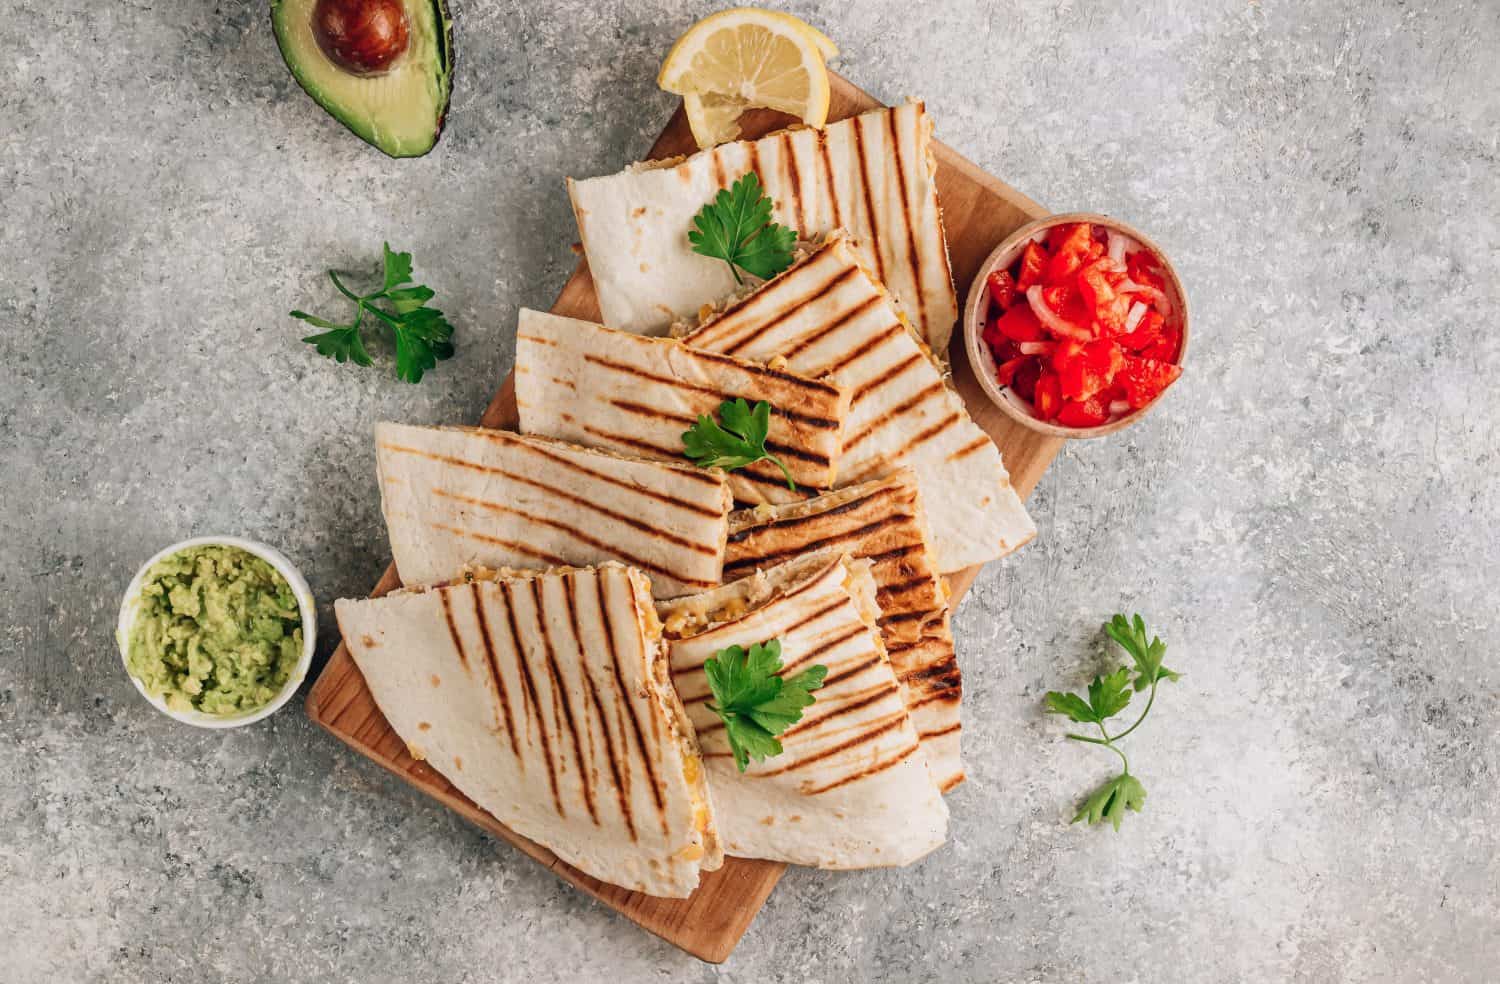 Grilled quesadillas on wooden board and with salsa and guacamole on stone background. Mexican cuisine concept Quesadilla wrap with chicken and corn. Top view